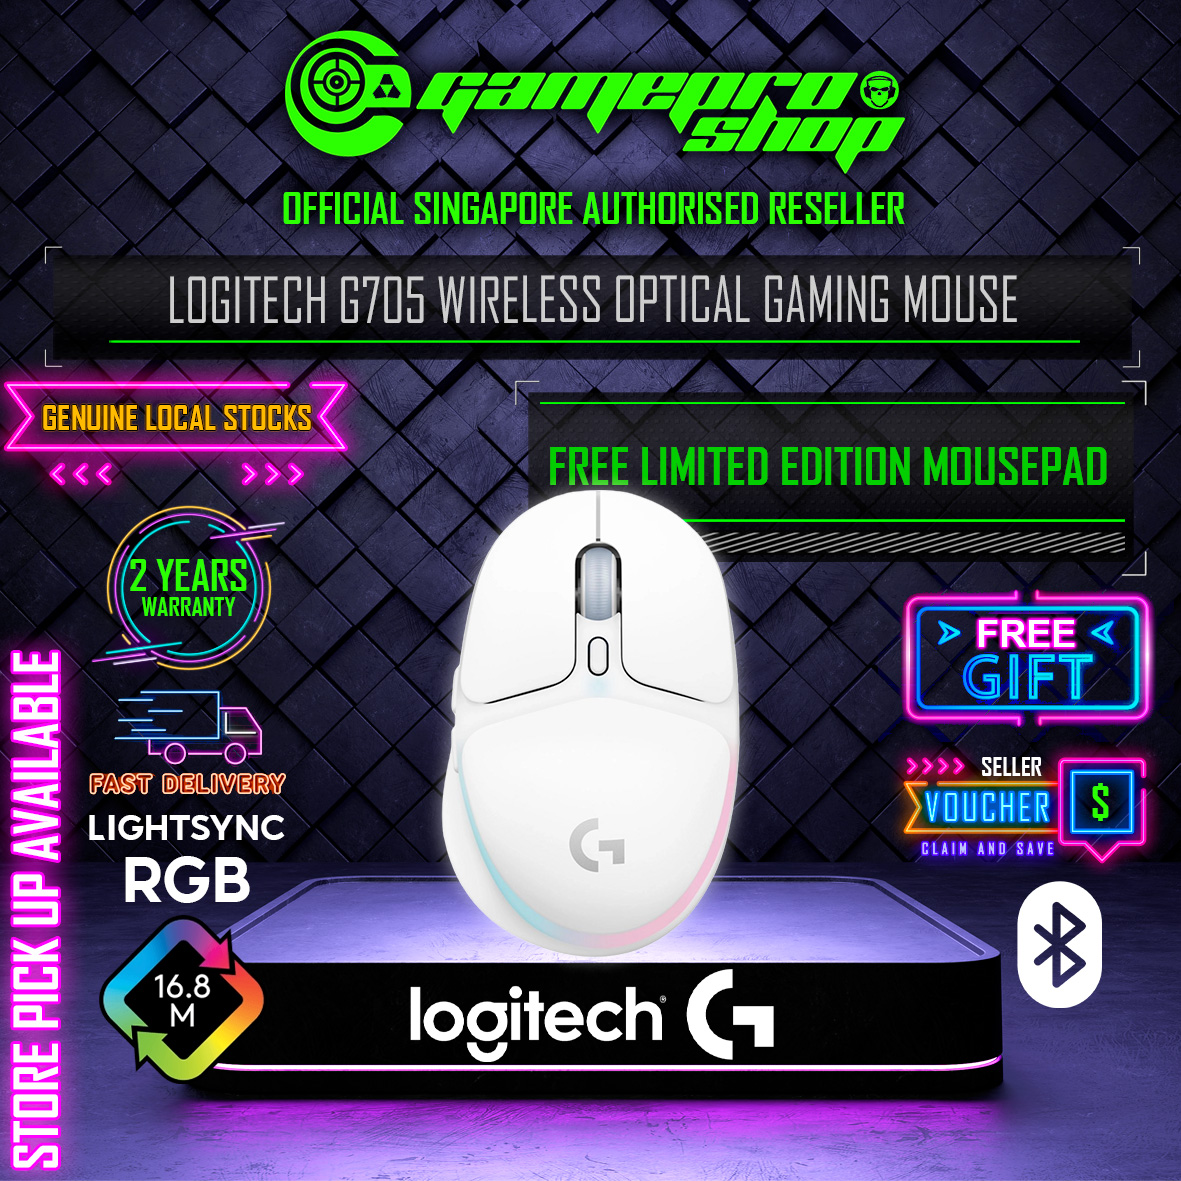 Free Gift] Collection Gaming Logitech Mist (2Y) Lighting 910-006369 LIGHTSYNC Mouse – RGB – GamePro Aurora Shop Wireless G705 – White